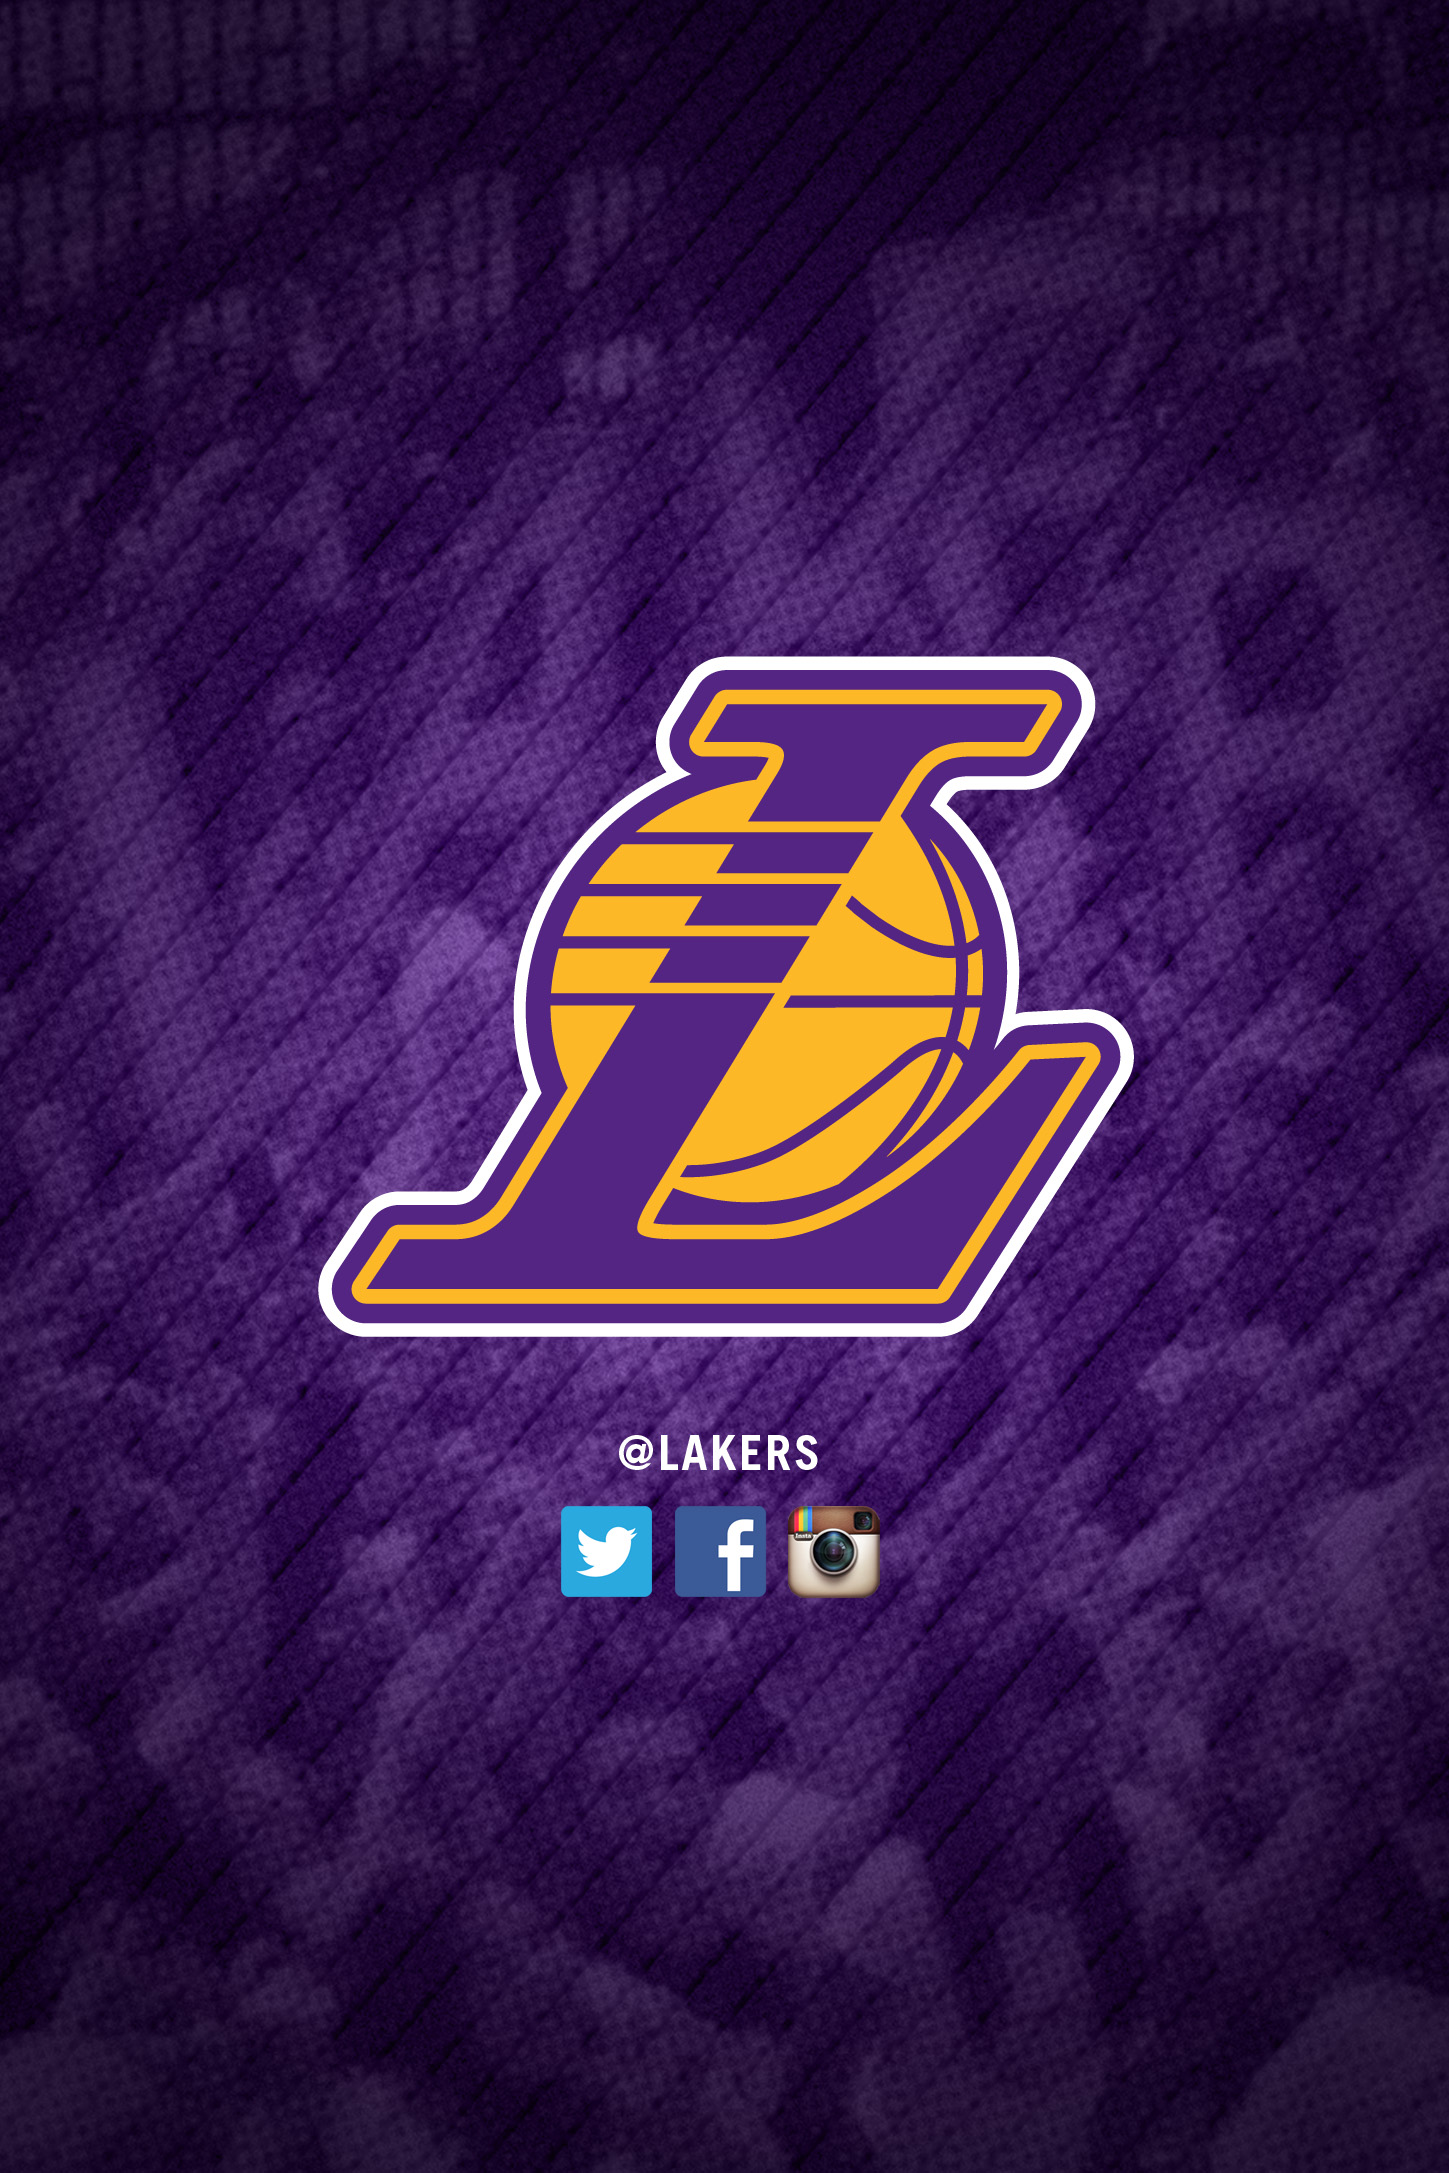 Best Lakers Wallpaper HD For I Phone iPhone2lovely